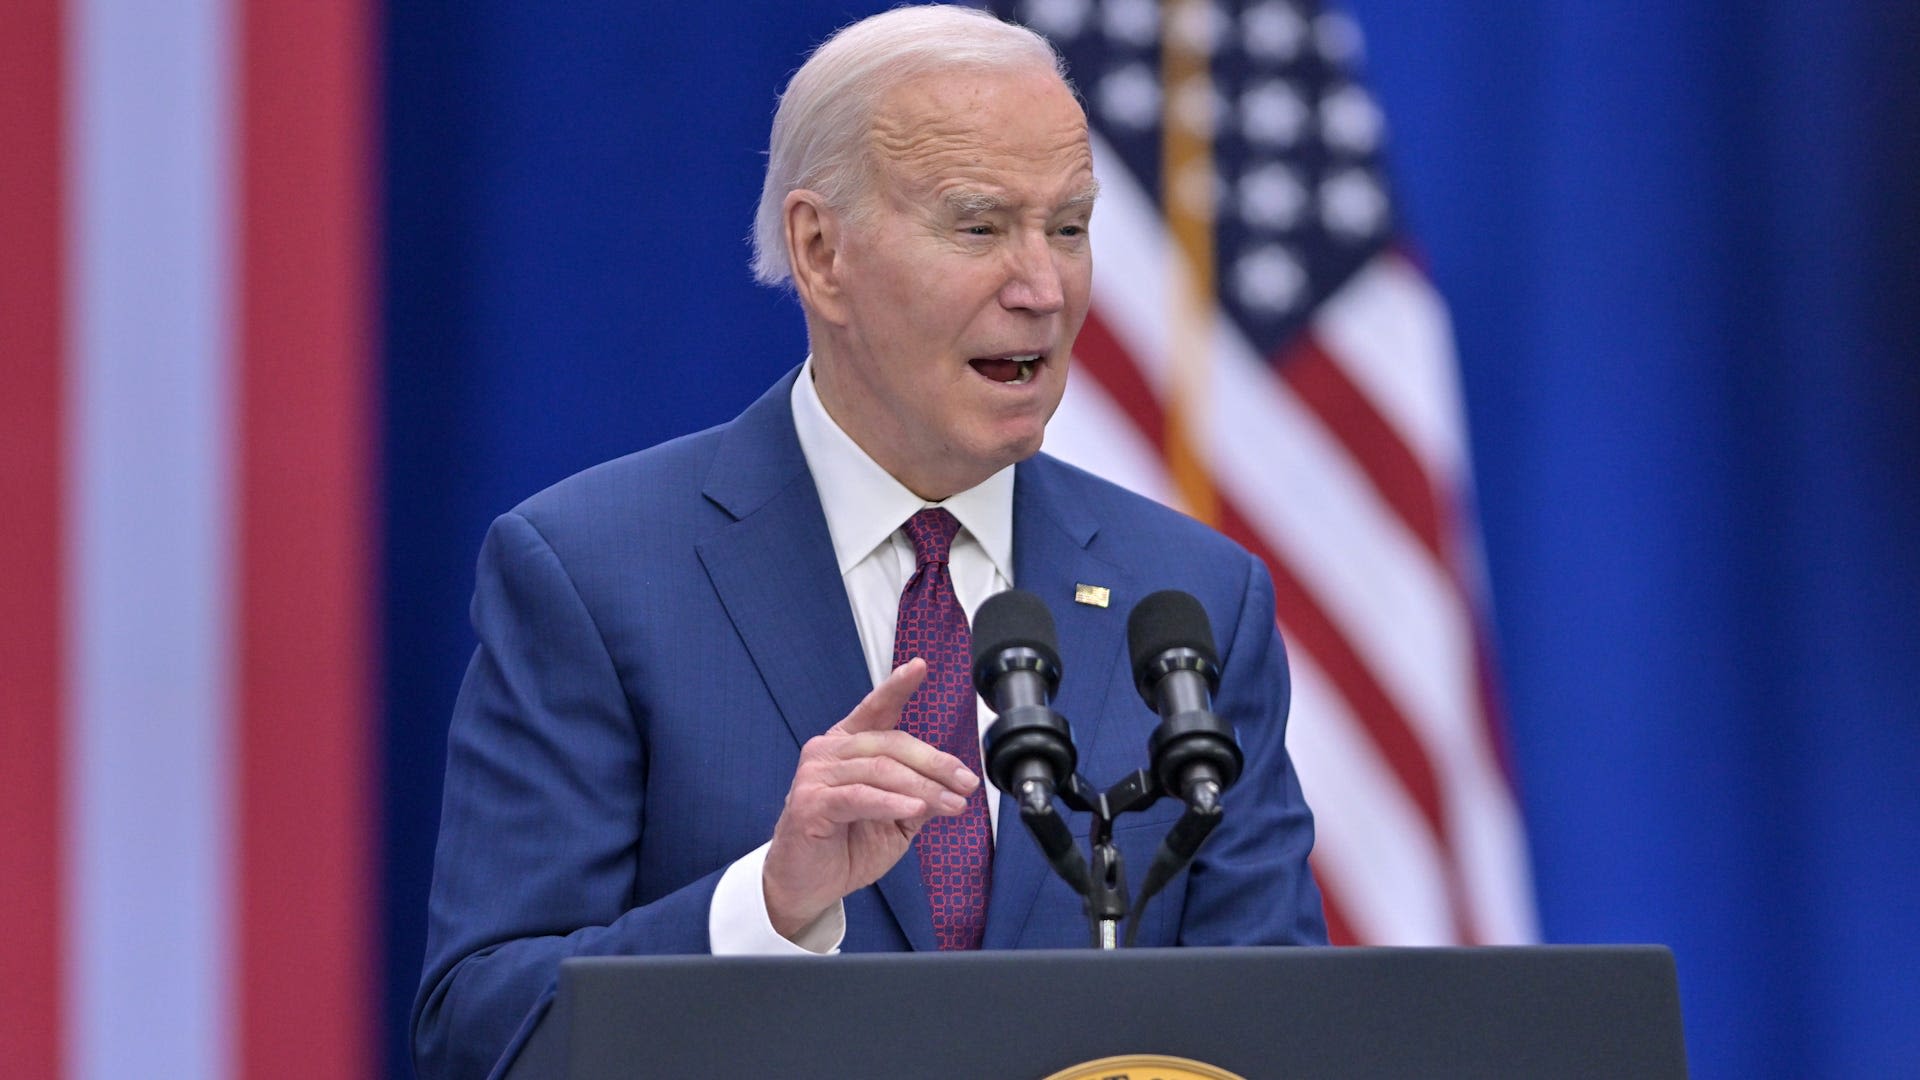 More Americans are earning $400,000, Biden's income threshold for tax hikes and audits